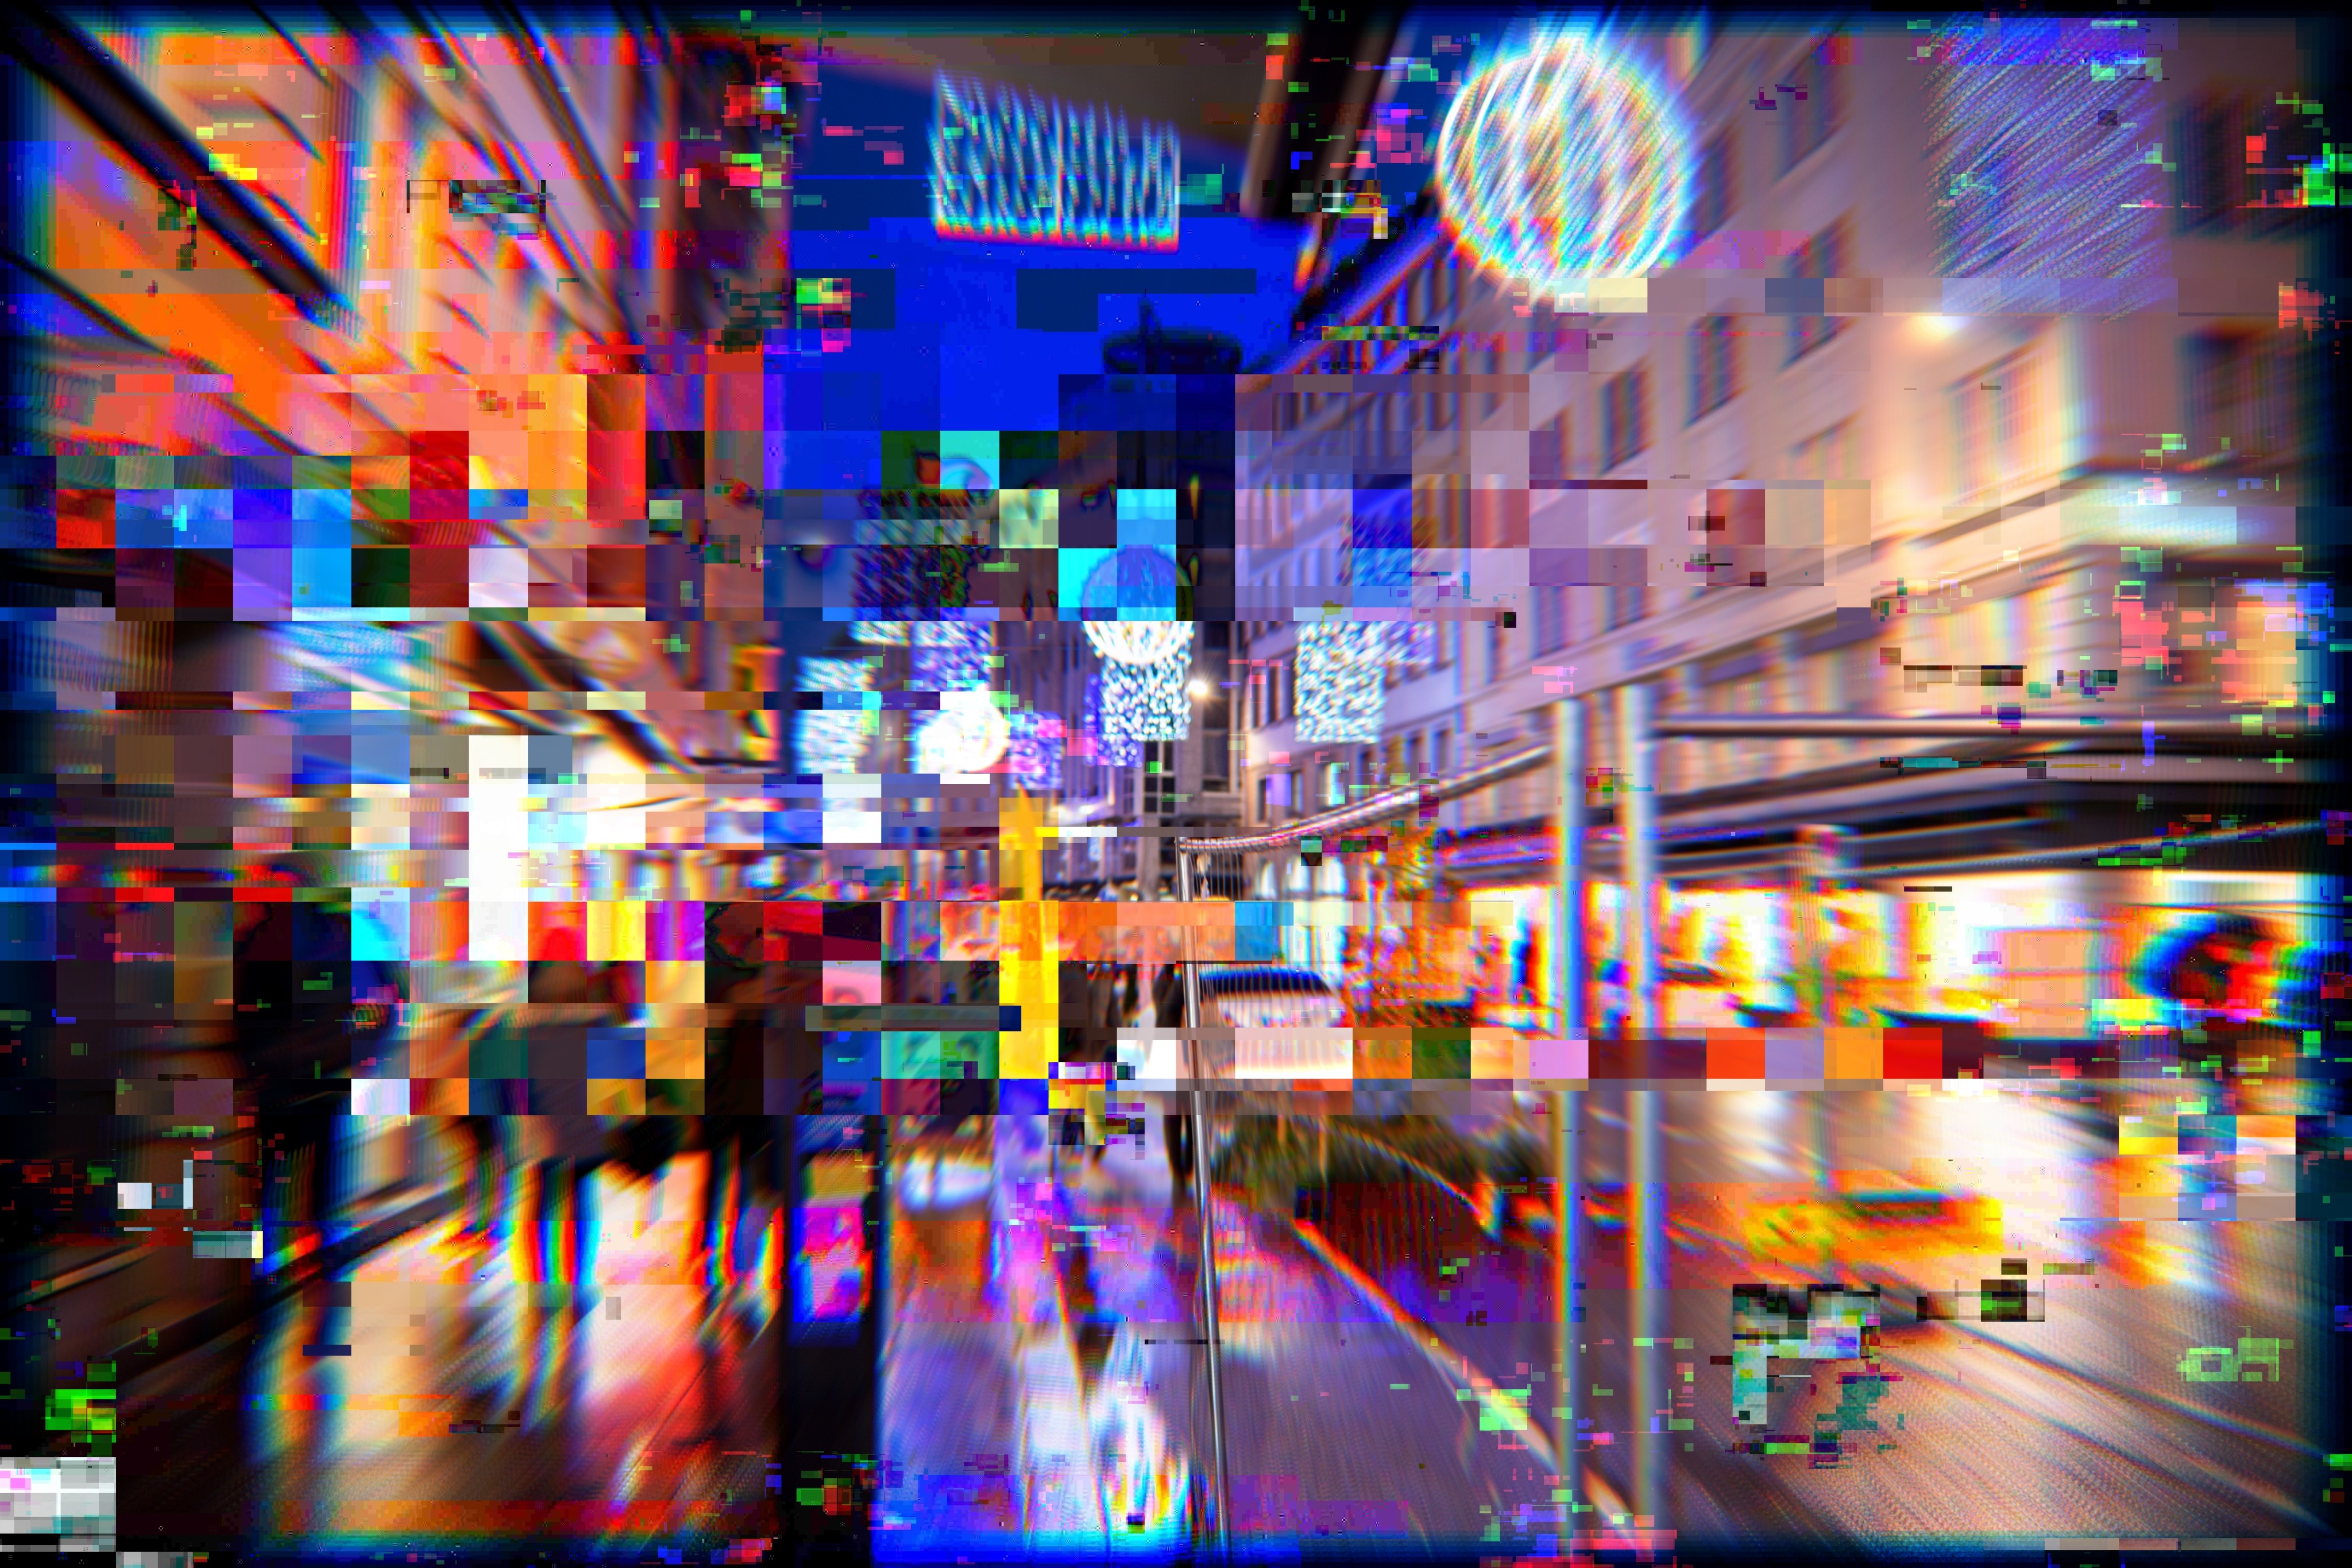 Properties along a rather busy street in metaverse conceptual reality. Photo: Shutterstock